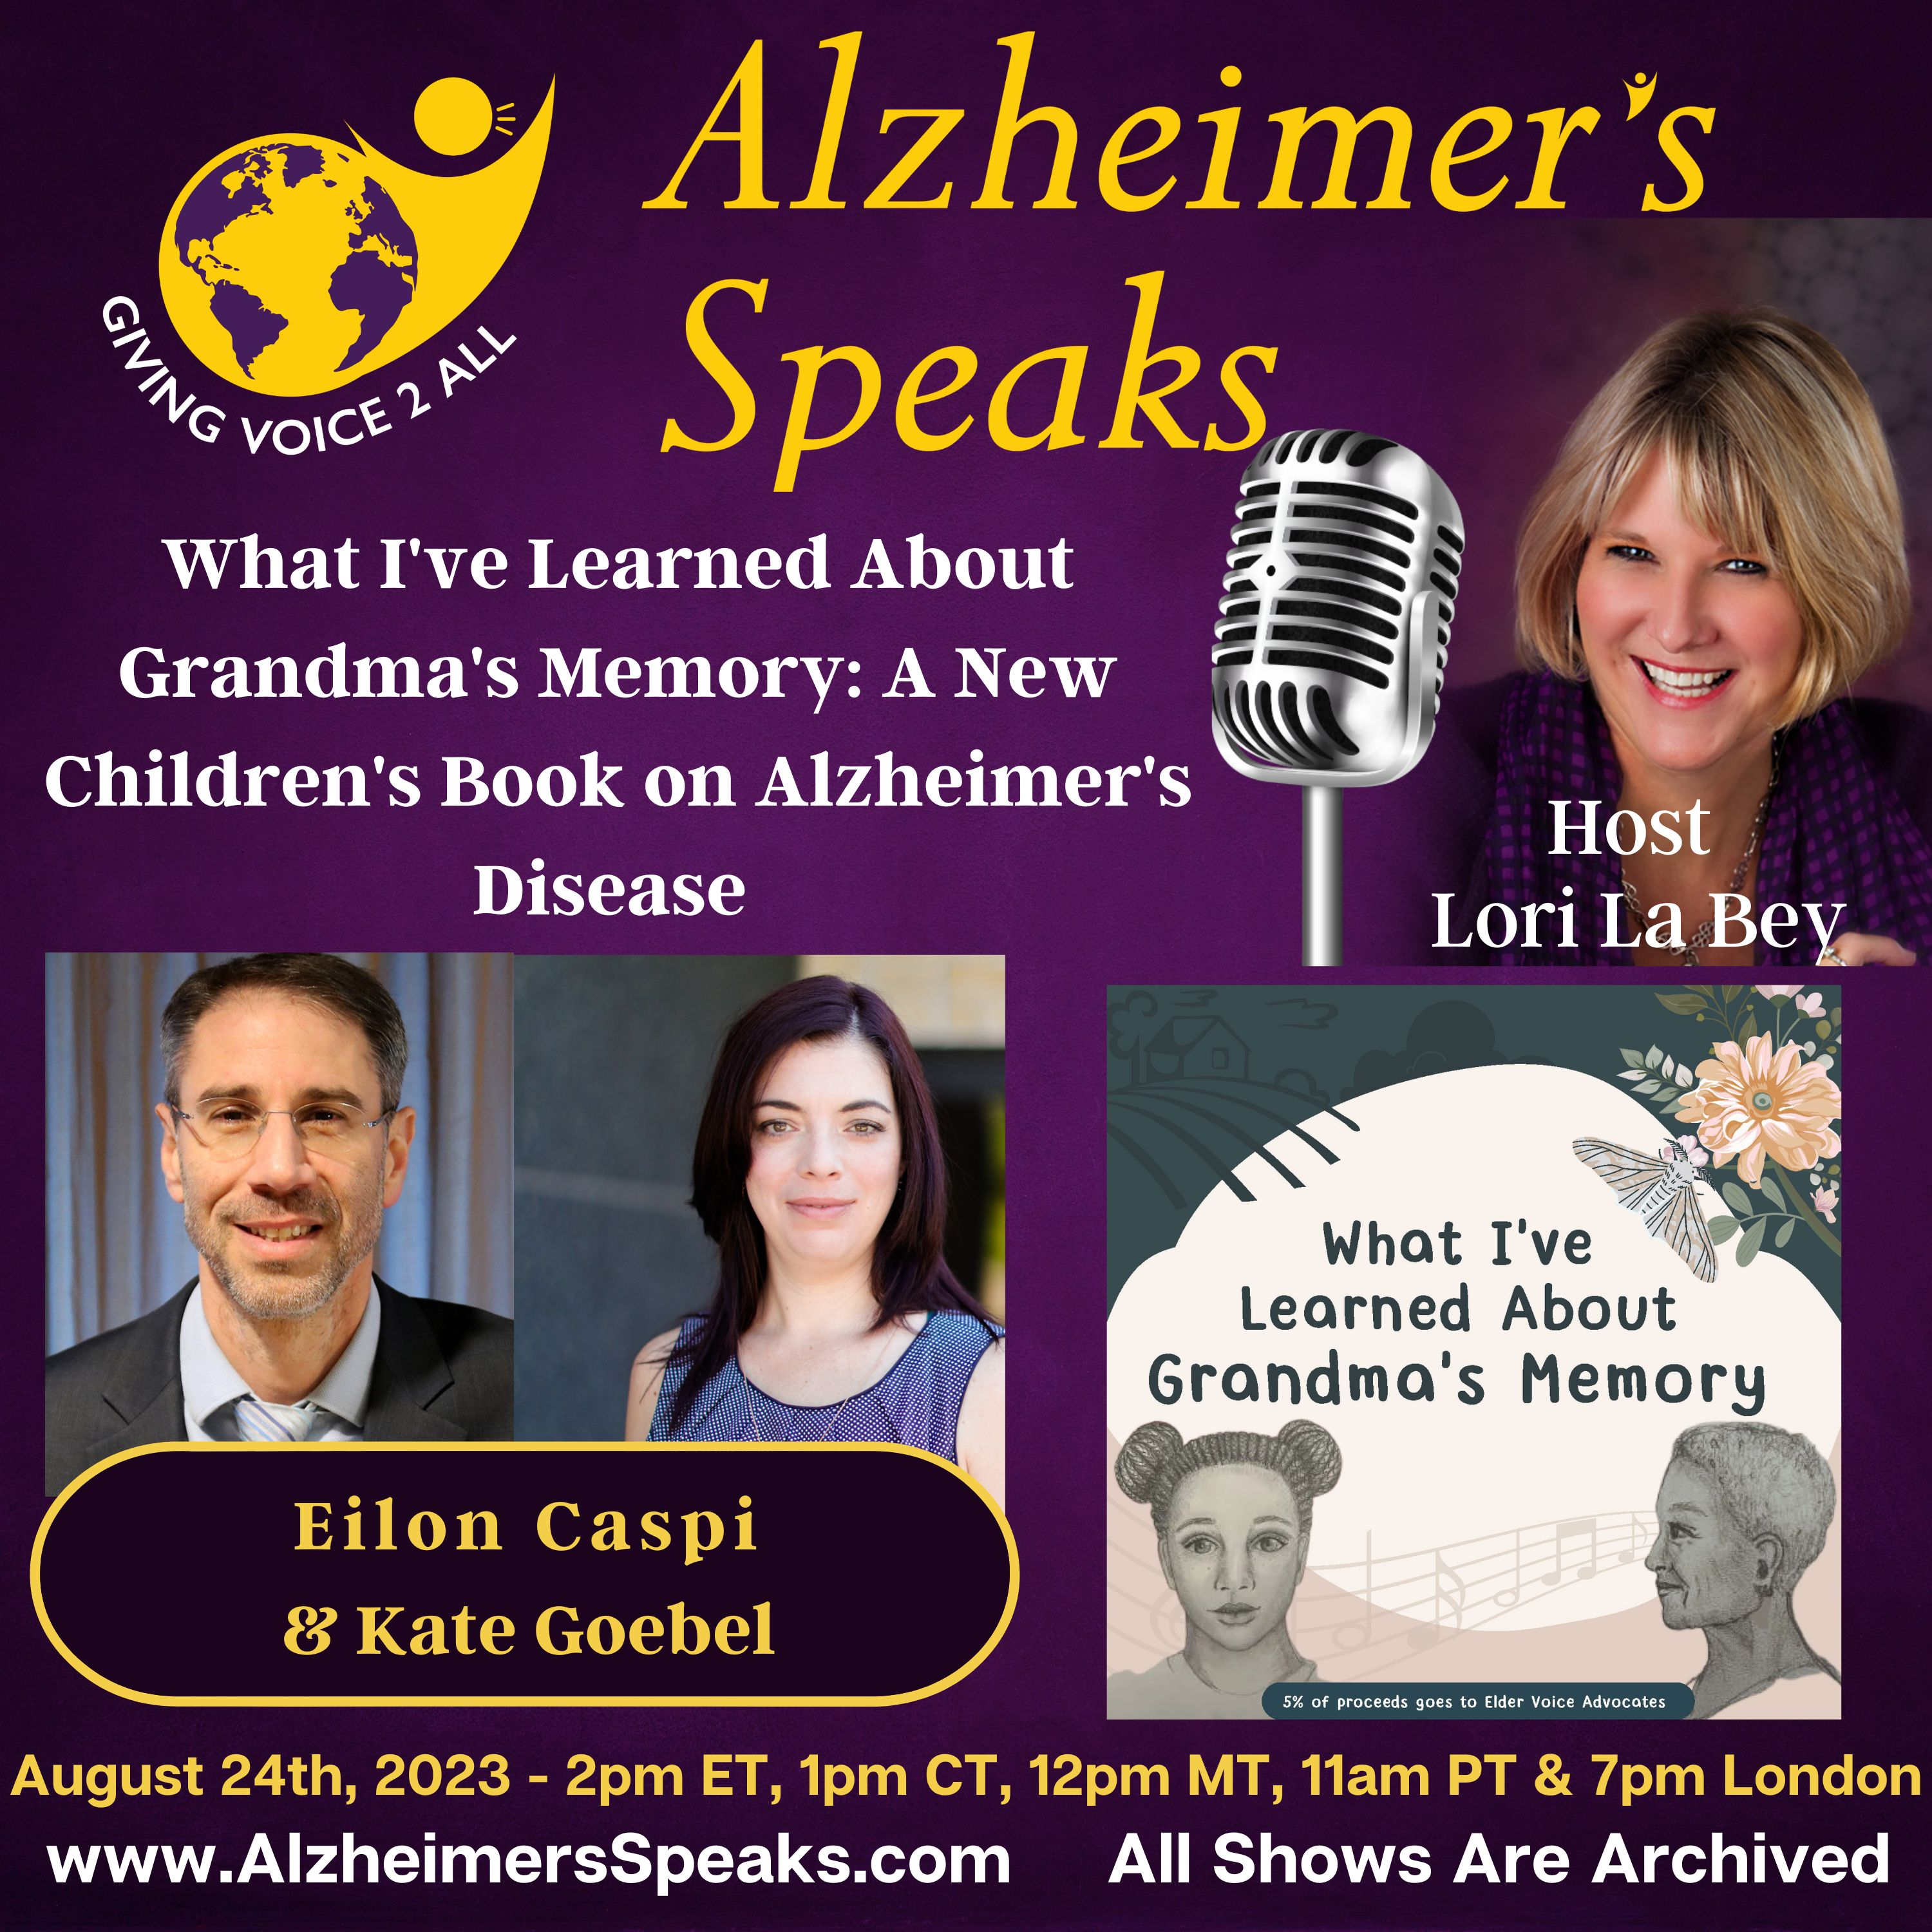 What I've Learned About Grandma's Memory: A New Children's Book on Alzheimer's Disease